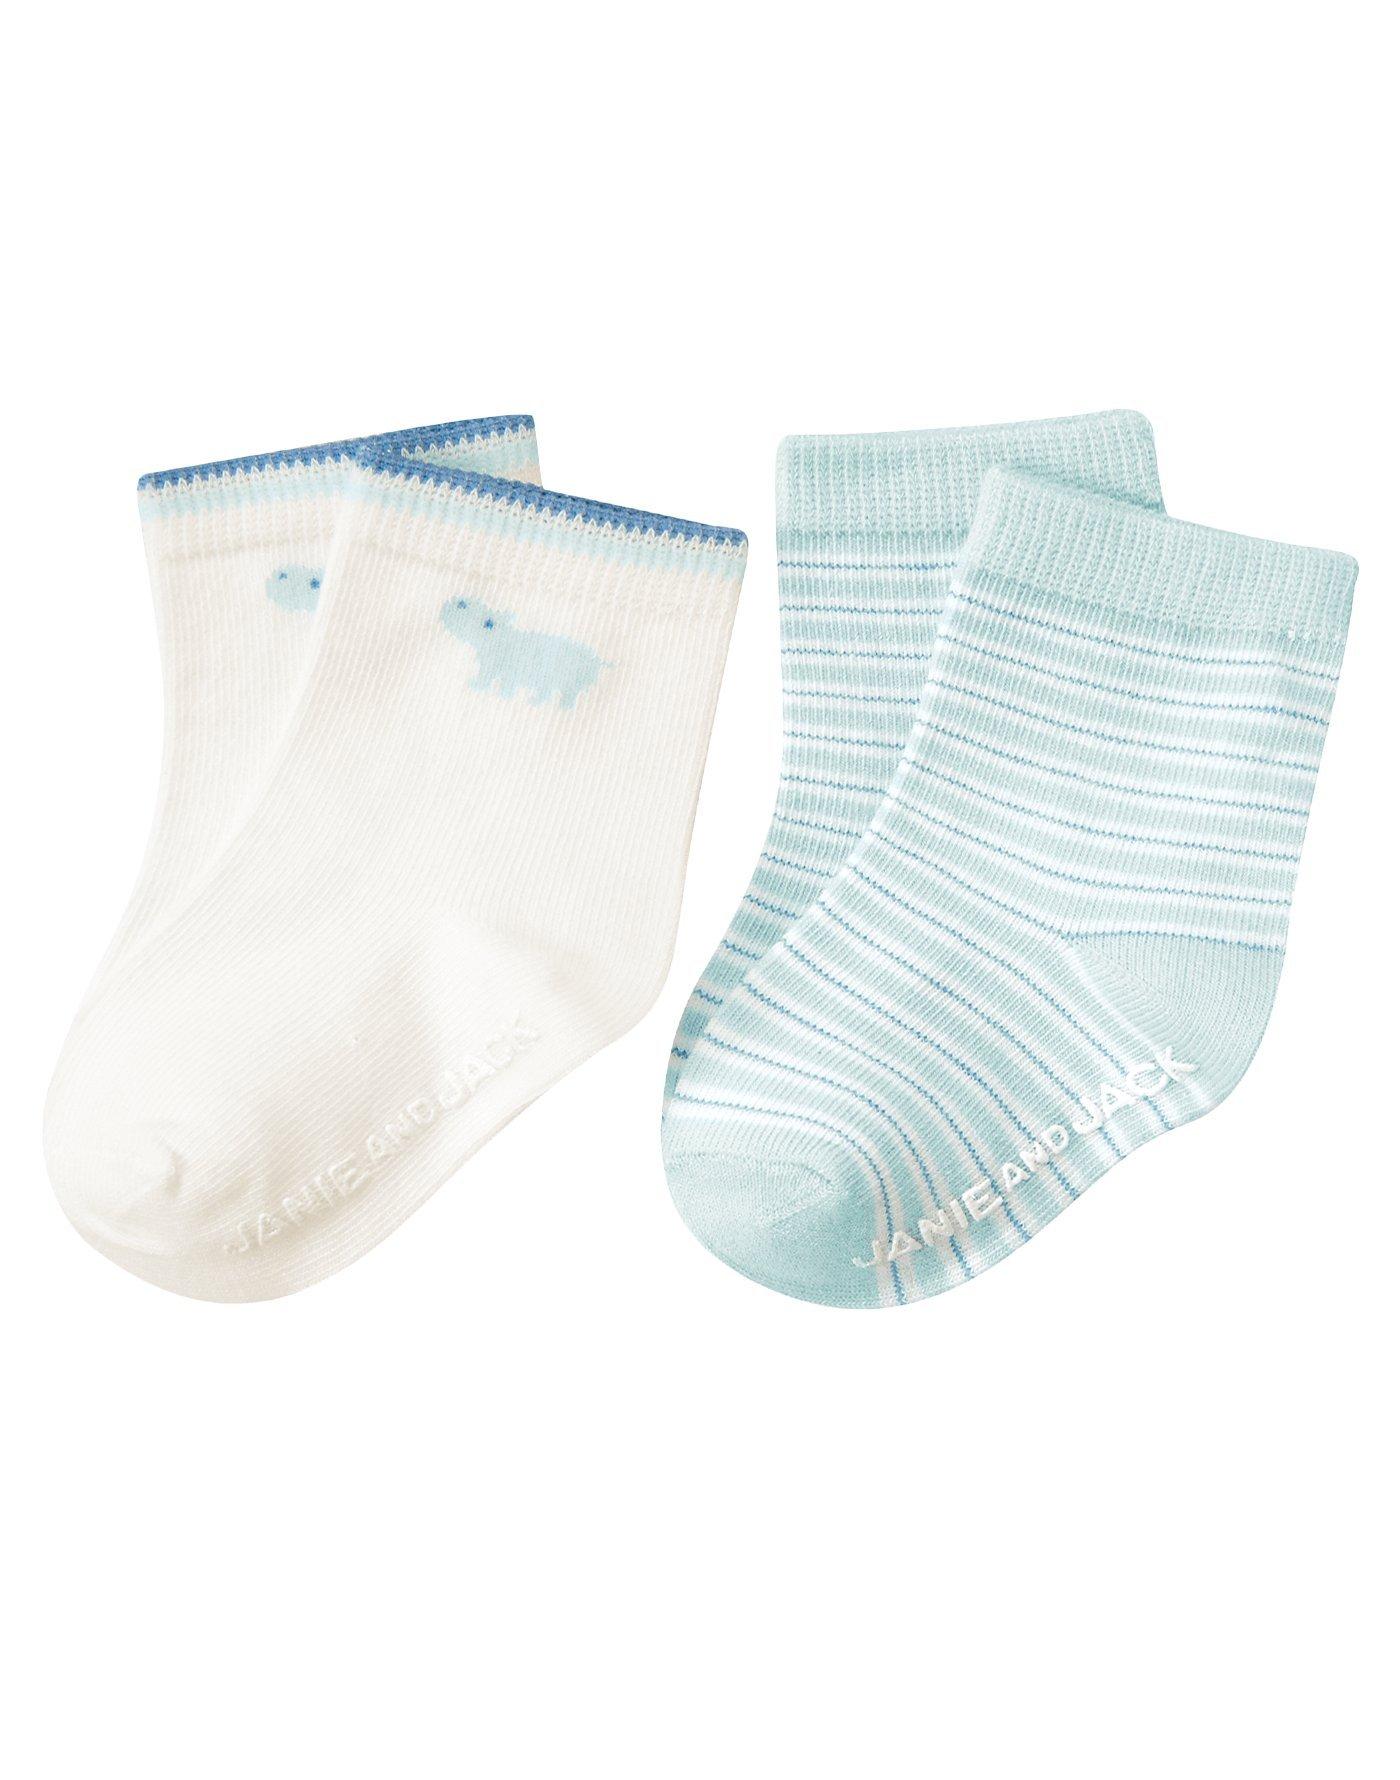 Hippo Sock Two-Pack image number 0